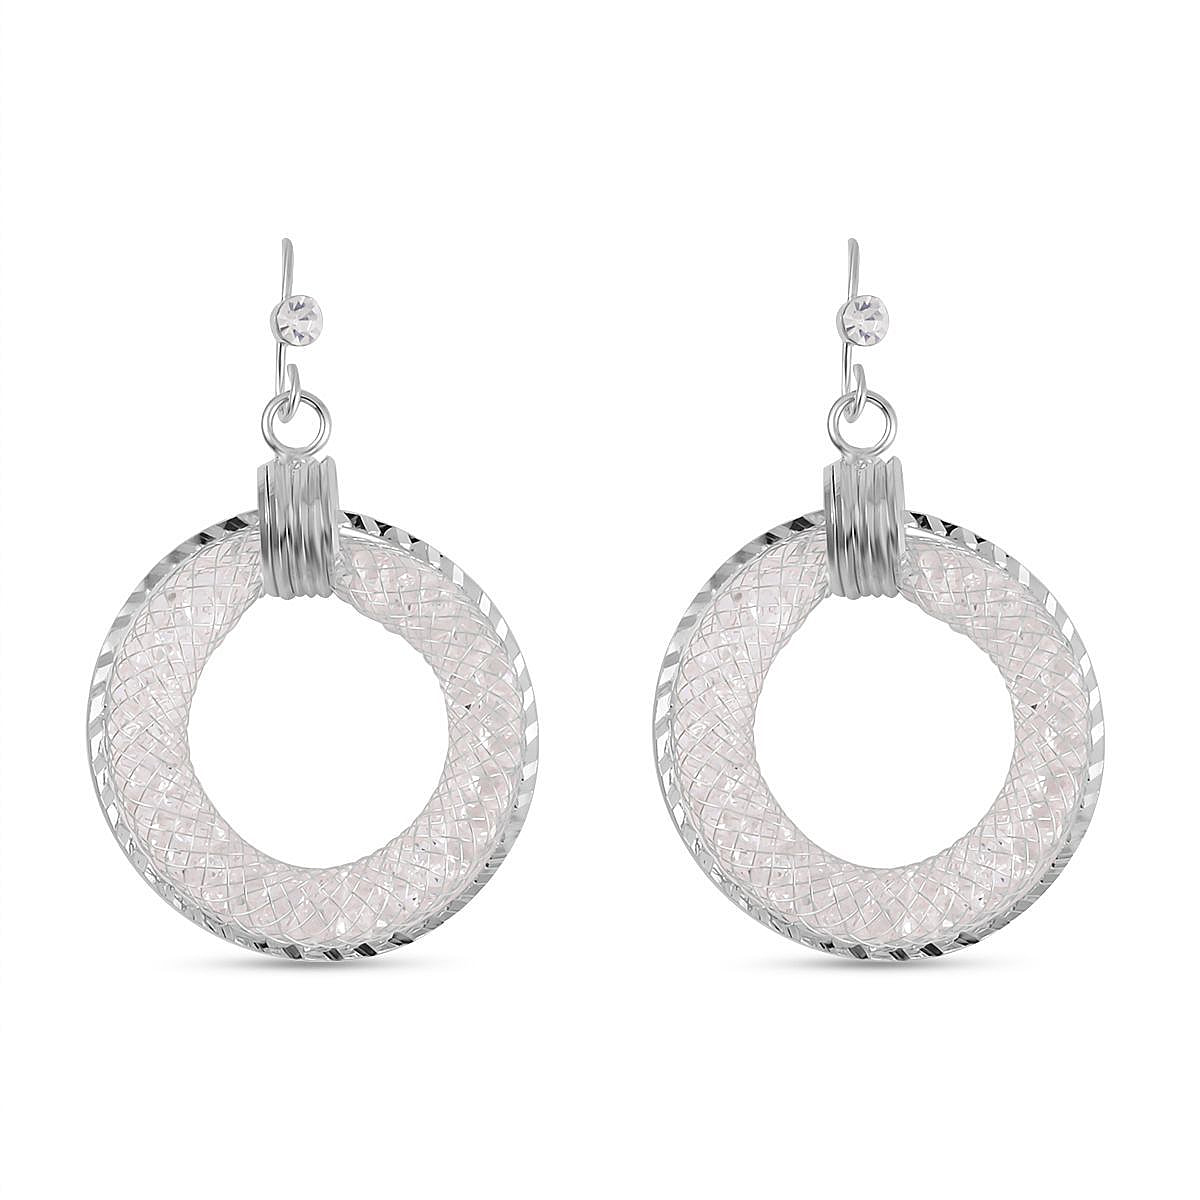 One Time Closeout - Star Light Austrian Crystal Circle Earrings - Silver